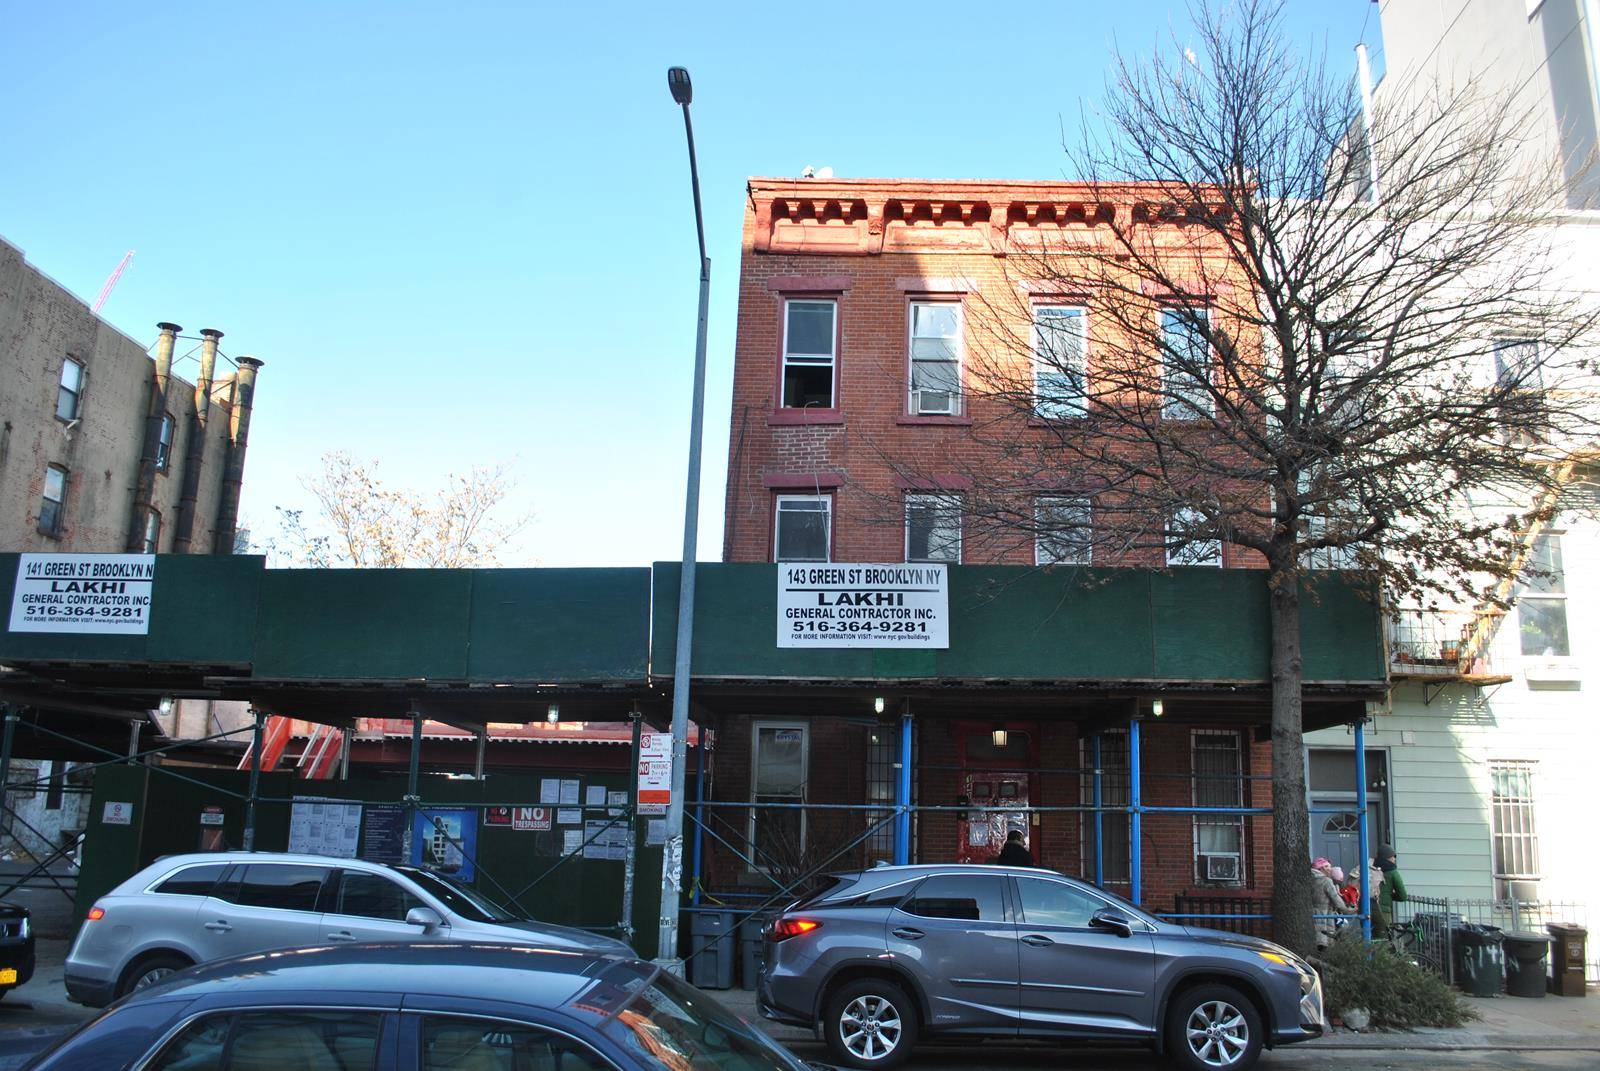 Voro New York is pleased to present for sale 143 Green Street, Greenpoint, Brooklyn NY The Property is 3, 750 square foot, three story walk up apartment building.